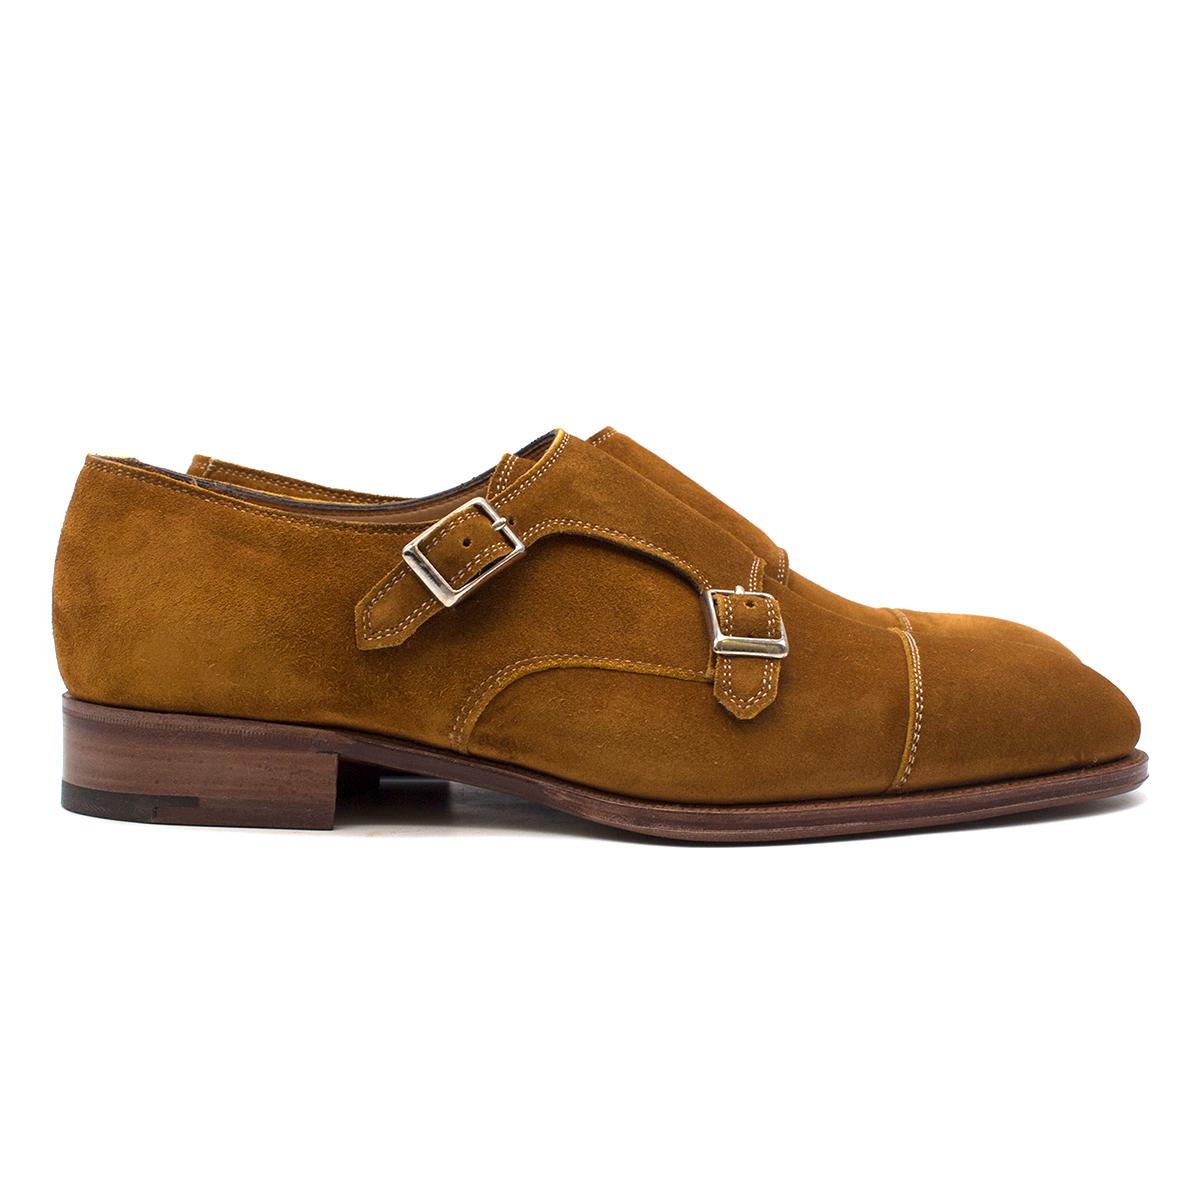 Hardy Amies Tan-brown Suede Double Monk Shoes

- Tan-brown suede monk shoes
- Double monk straps
- Smart round toe shape
- Nude leather lining with logo embroidered
- Leather soles
- Low heel
- This item comes with the original shoe box

Please